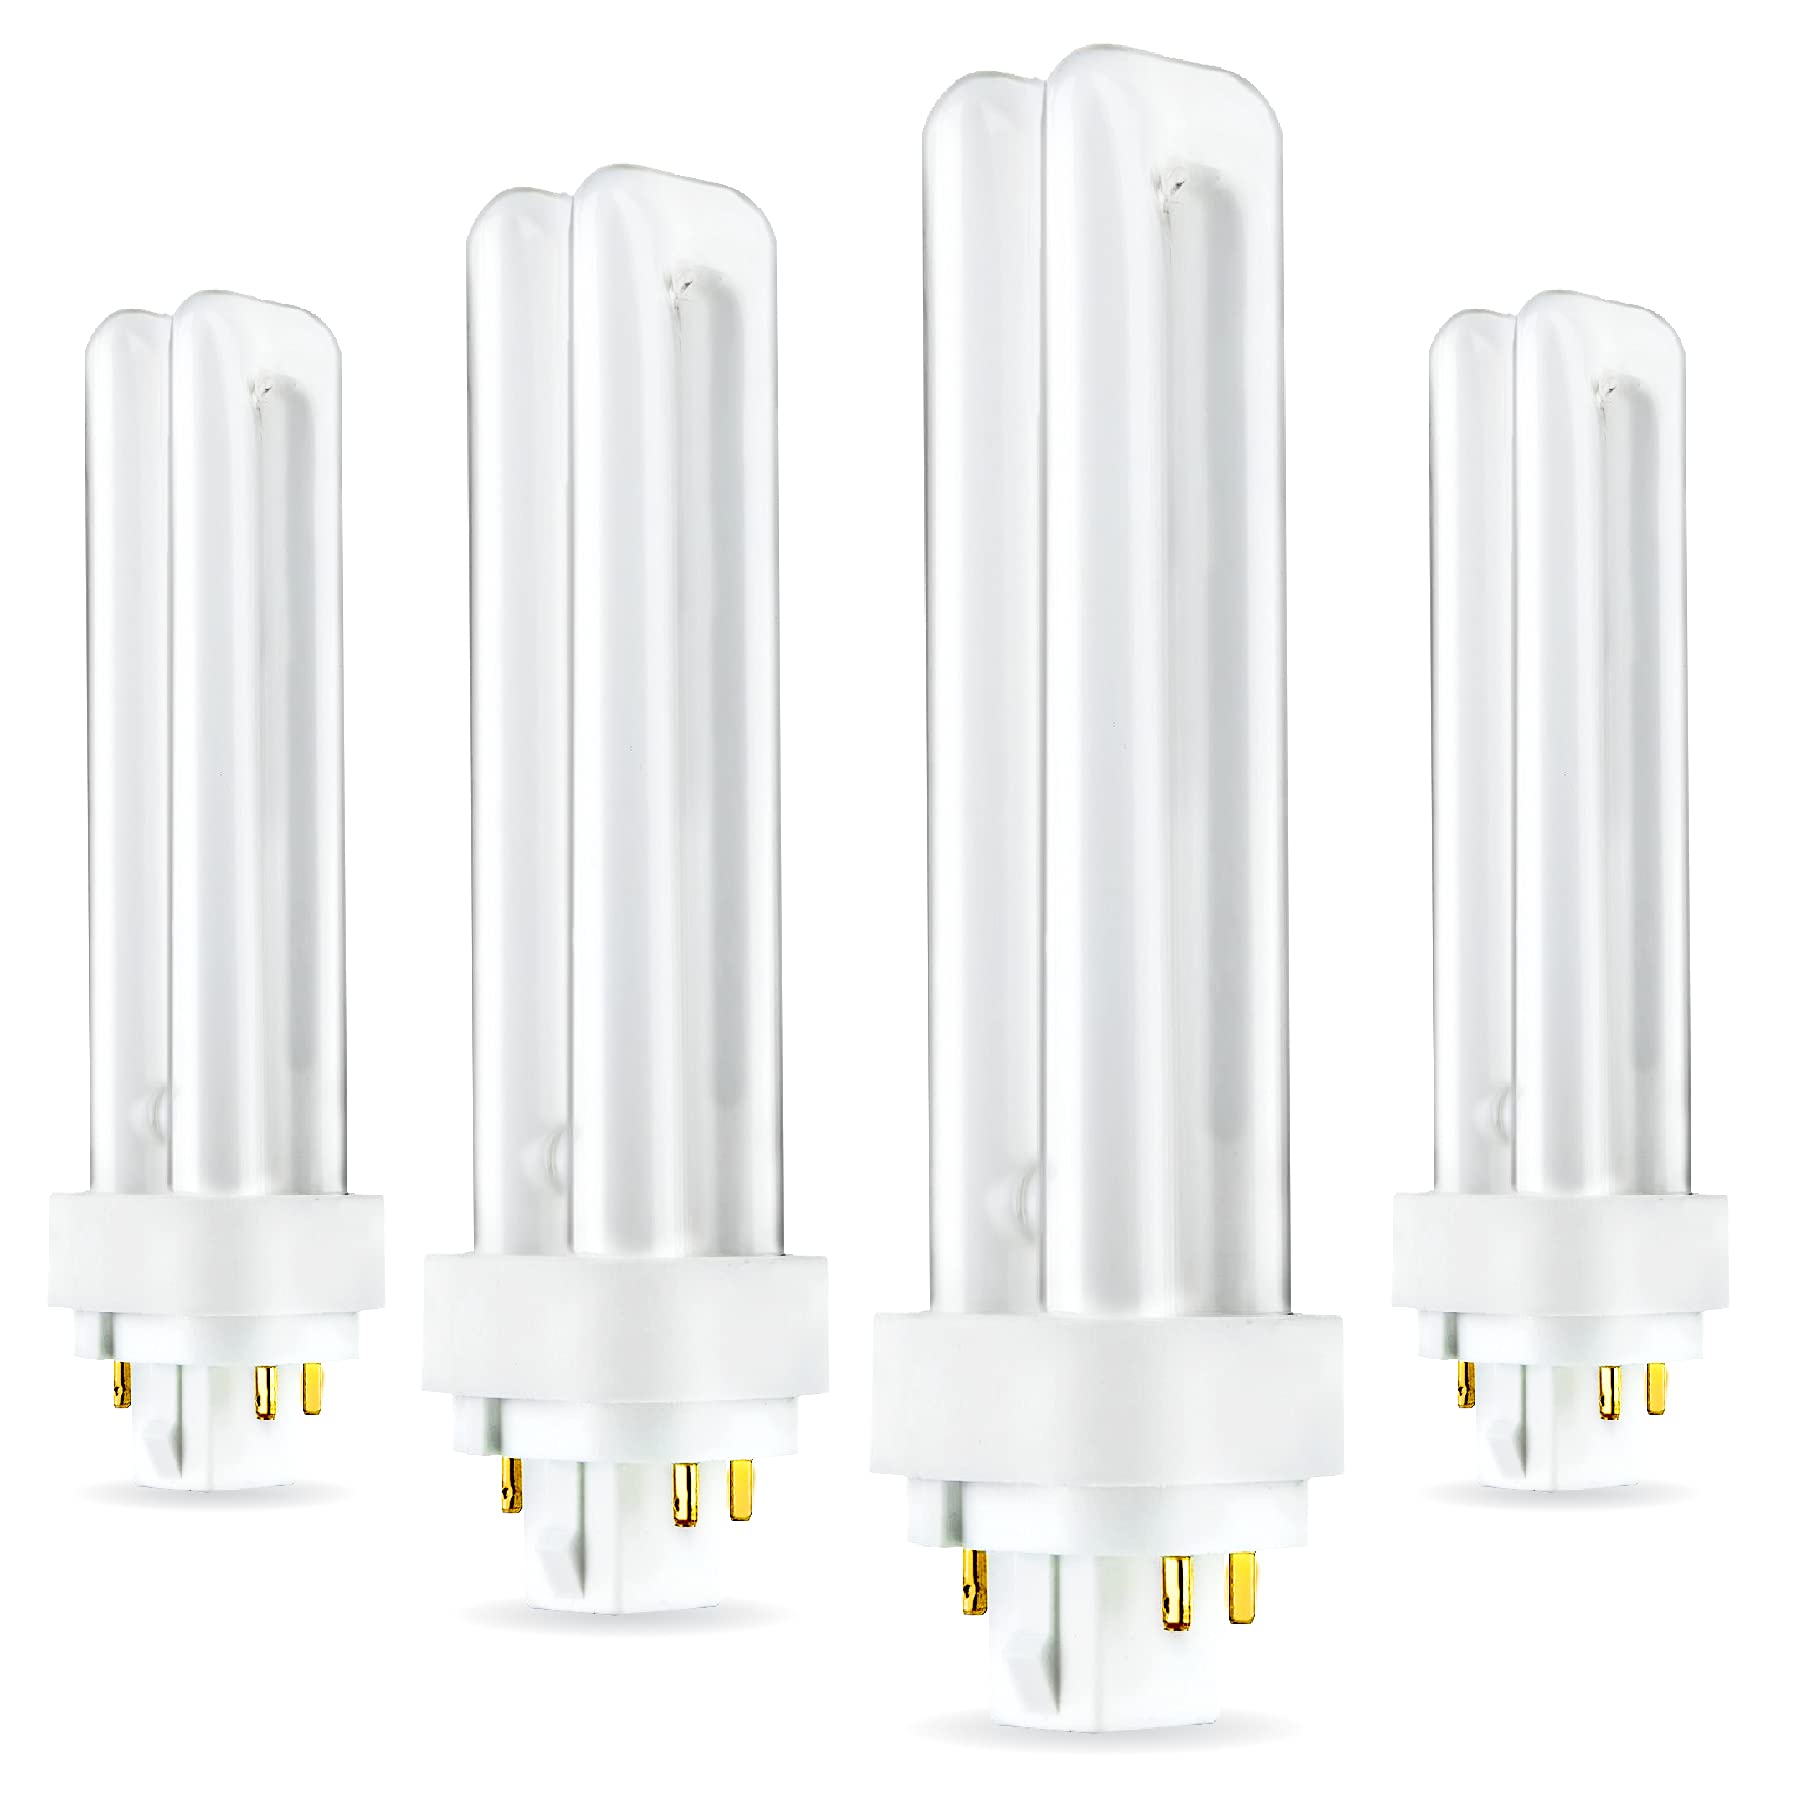 (4 Pack) PLC-13W 841, 4 Pin G24q-1, 13 Watt Double Tube, Compact Fluorescent Light Bulb, Replacement for Philips 38328-1 PL-C 13W/841/4P/ALTO, Sylvania 20667 and GE 97597 - F13DBX/841/ECO4P  - Acceptable